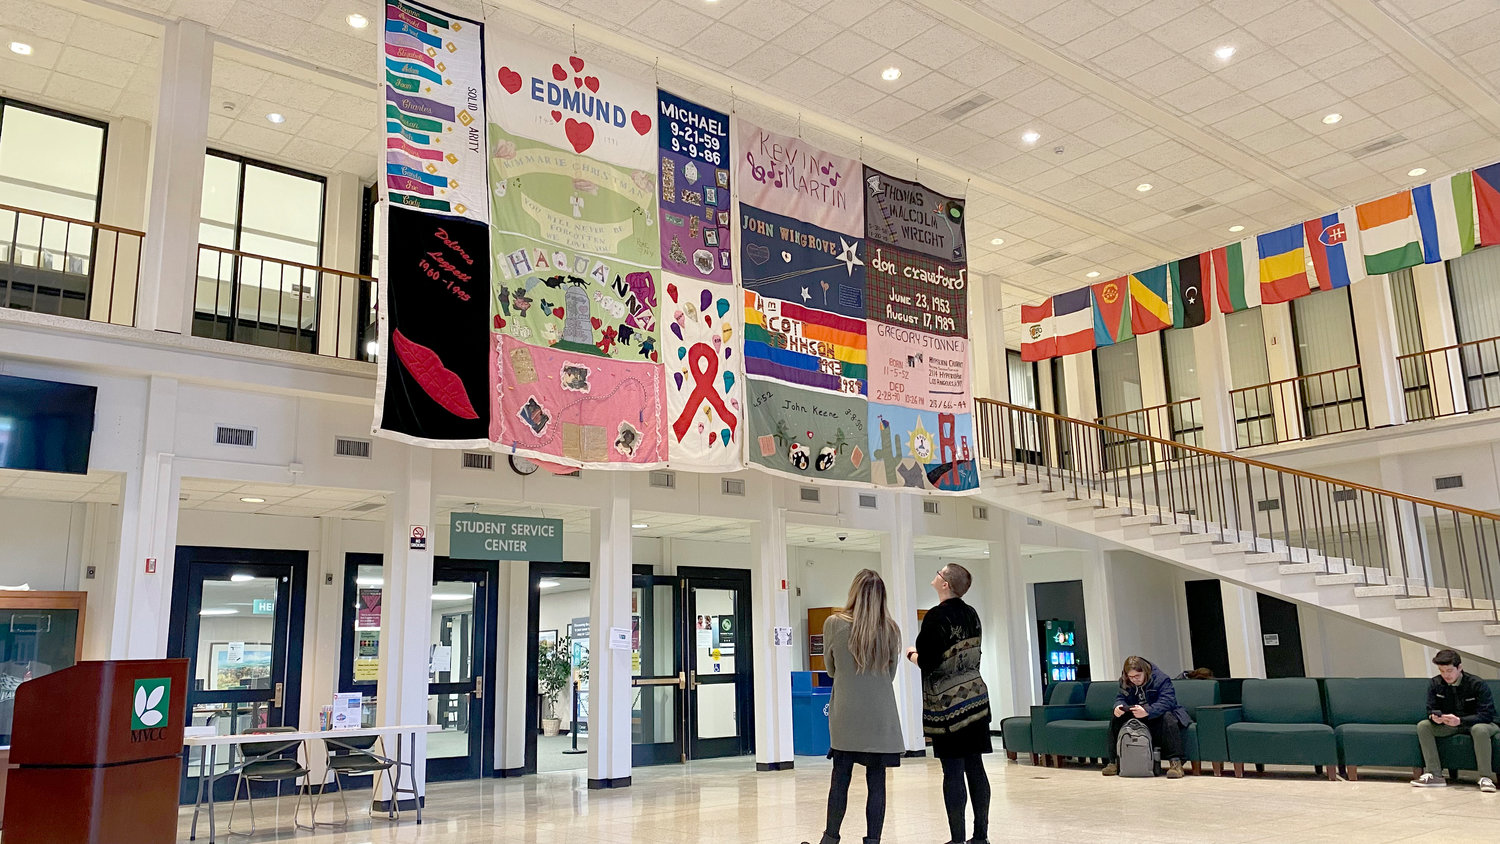 Panels from the AIDS Memorial Quilt were on display at both Mohawk Valley Community College campuses in honor of World AIDS Day.